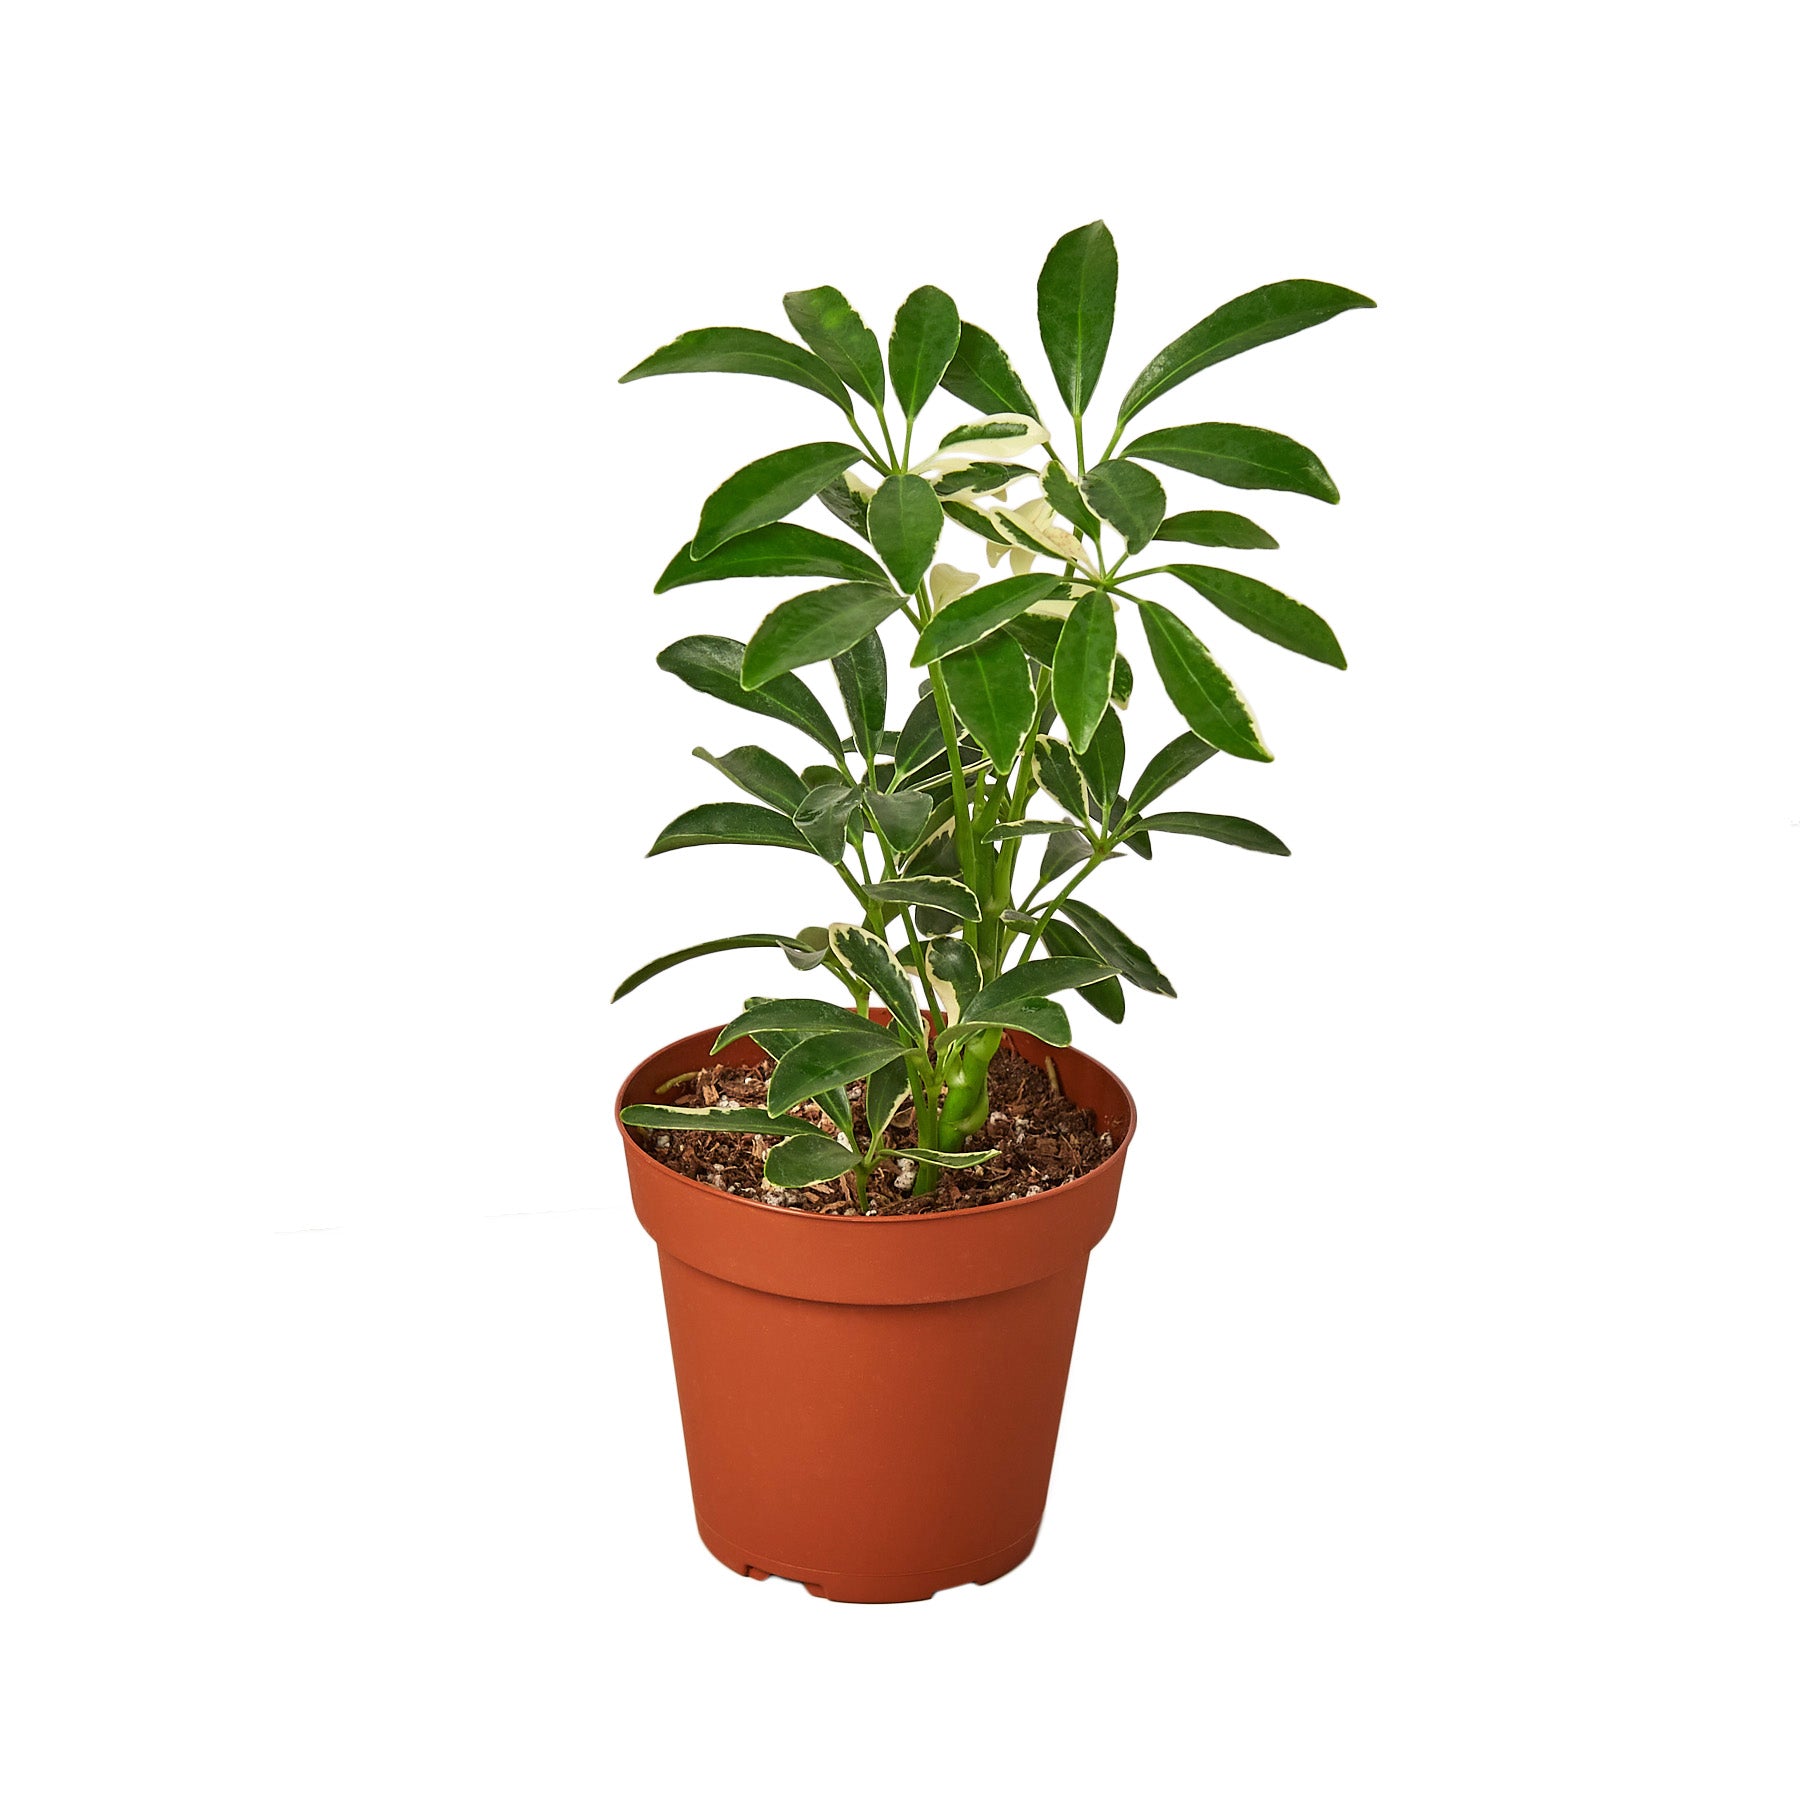 A small plant in a pot displayed on a white background at a garden center.